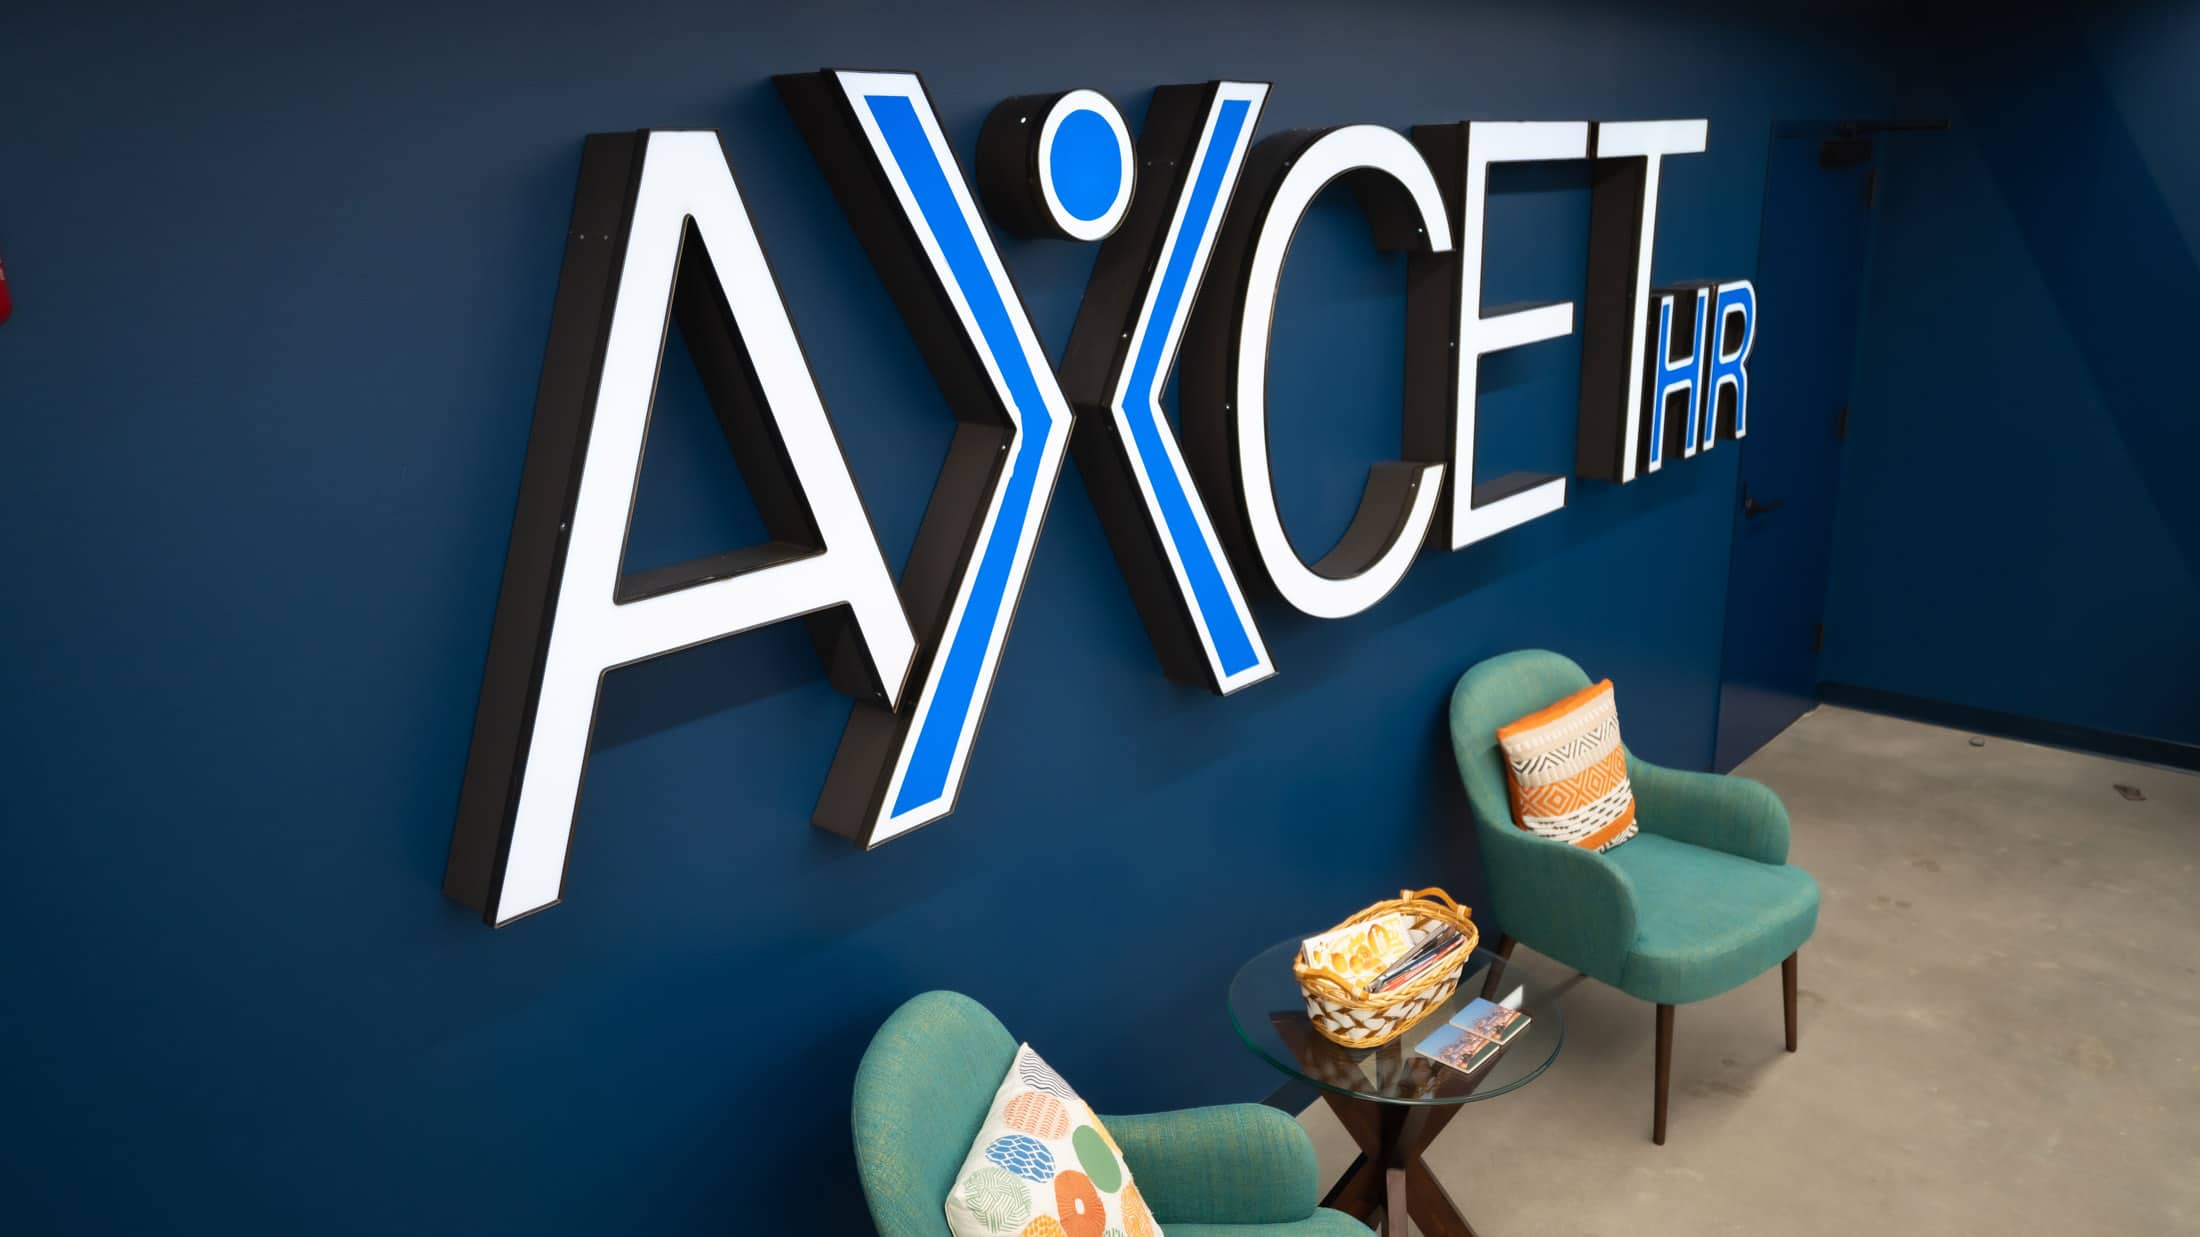 Employee Benefits Services in Kansas City MO & KS | Axcet HR ...